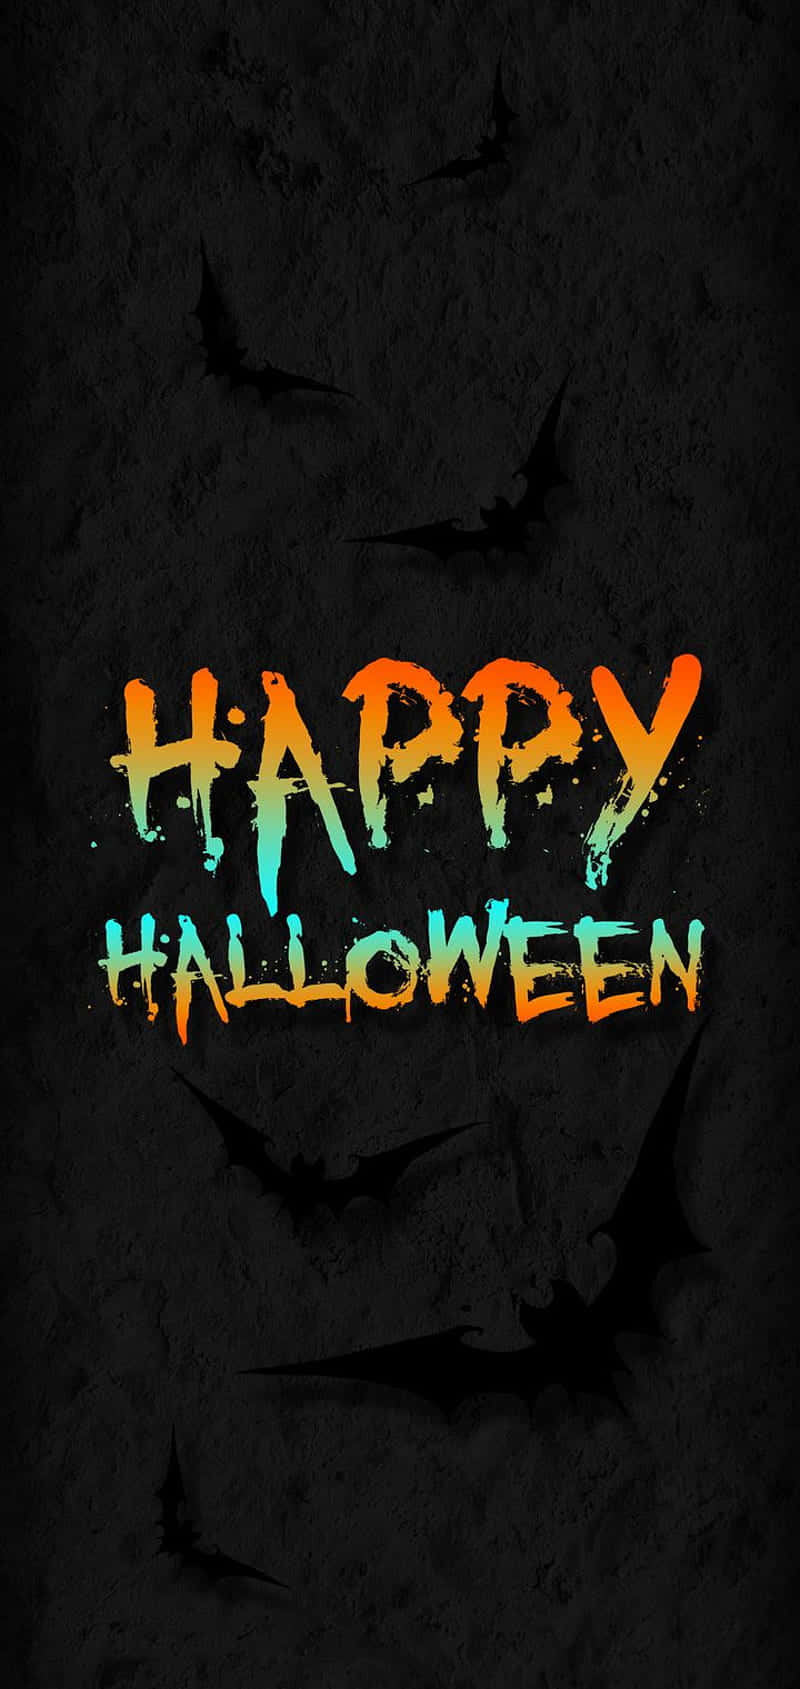 Hang onto your treats this Halloween with a spooky Macbook Wallpaper